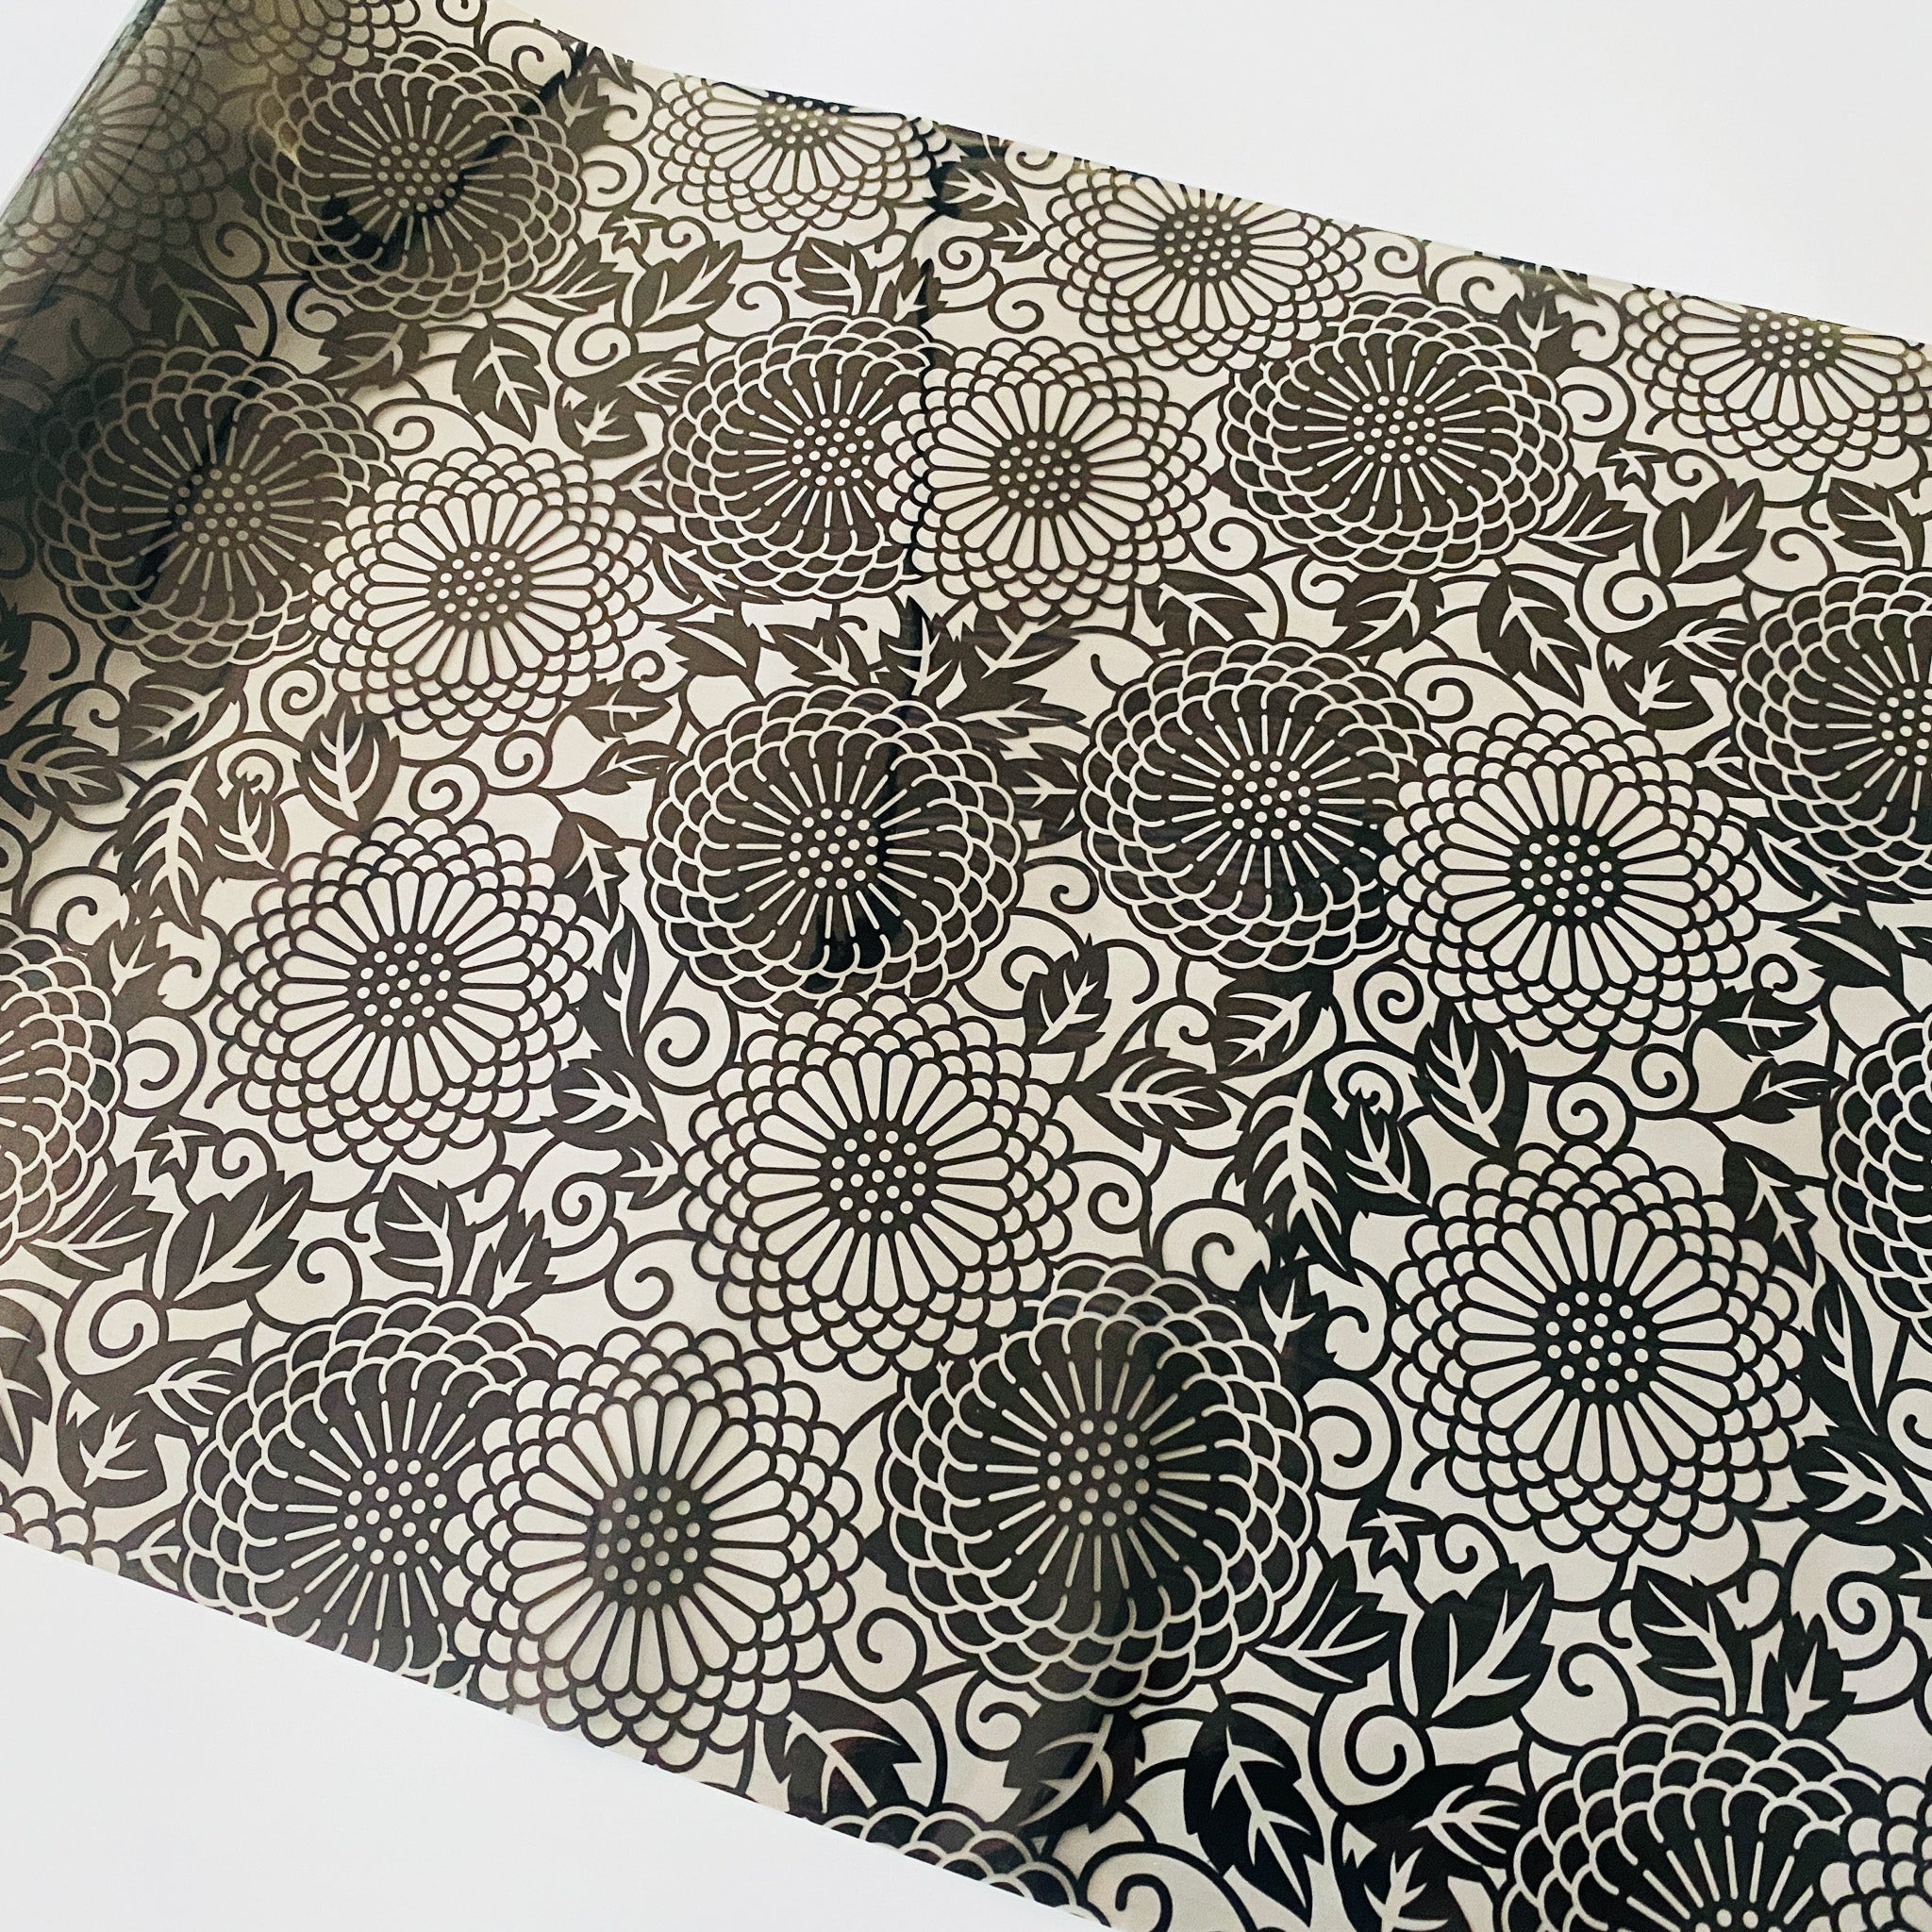 A roll of a foil transfer that features a black circular floral pattern is against a white background.